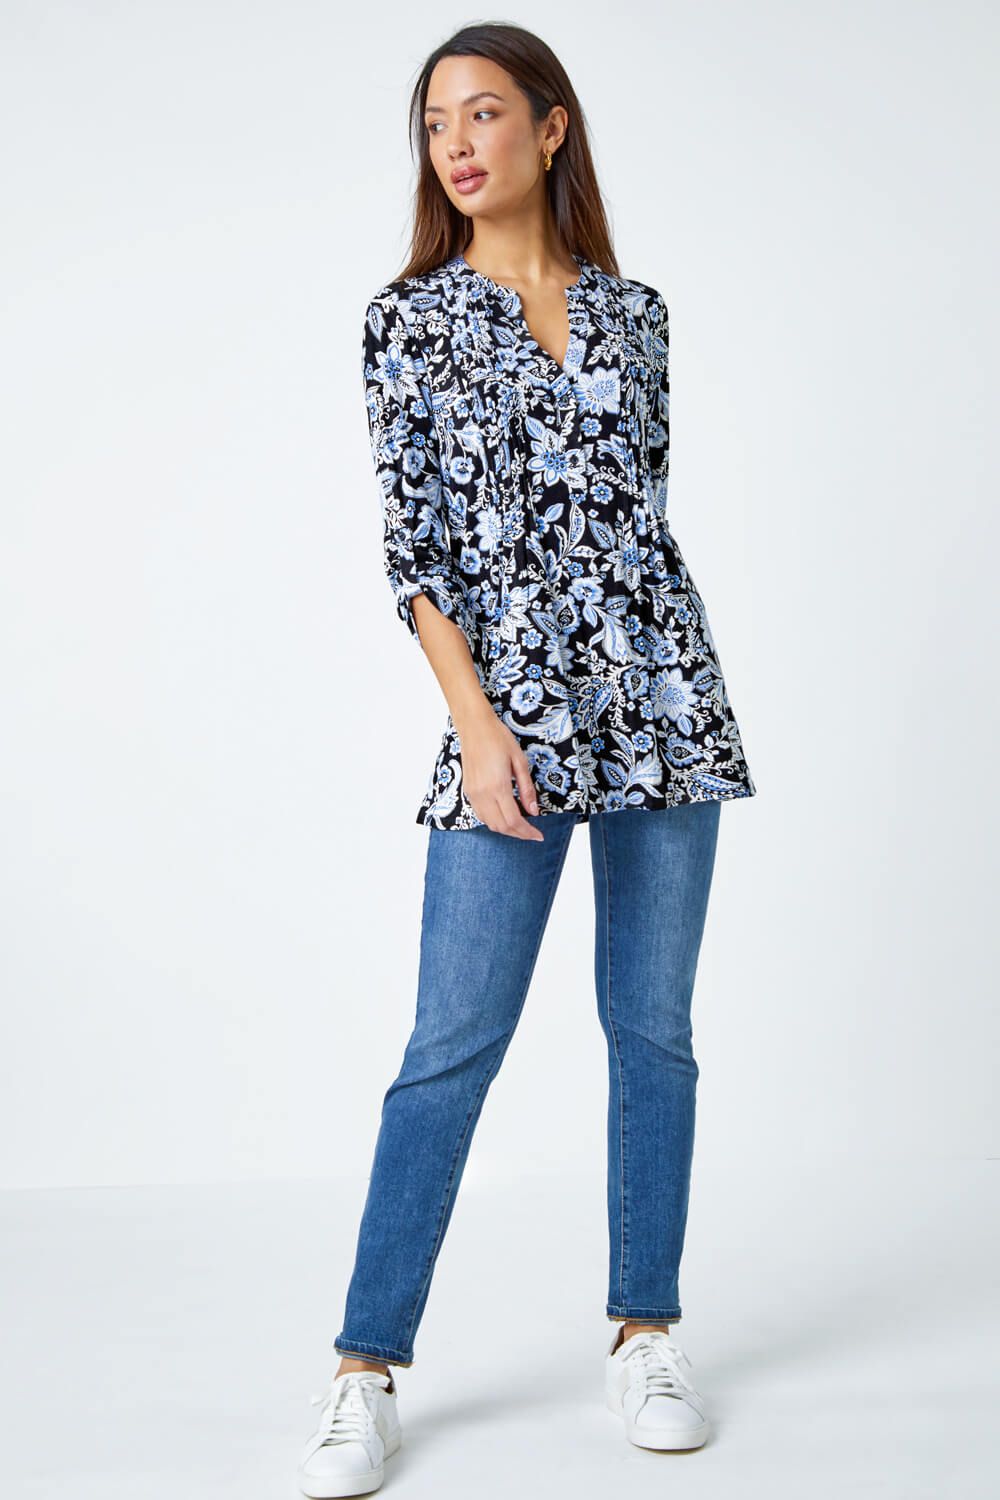 Black Floral Print Pintuck Stretch Top, Image 2 of 5